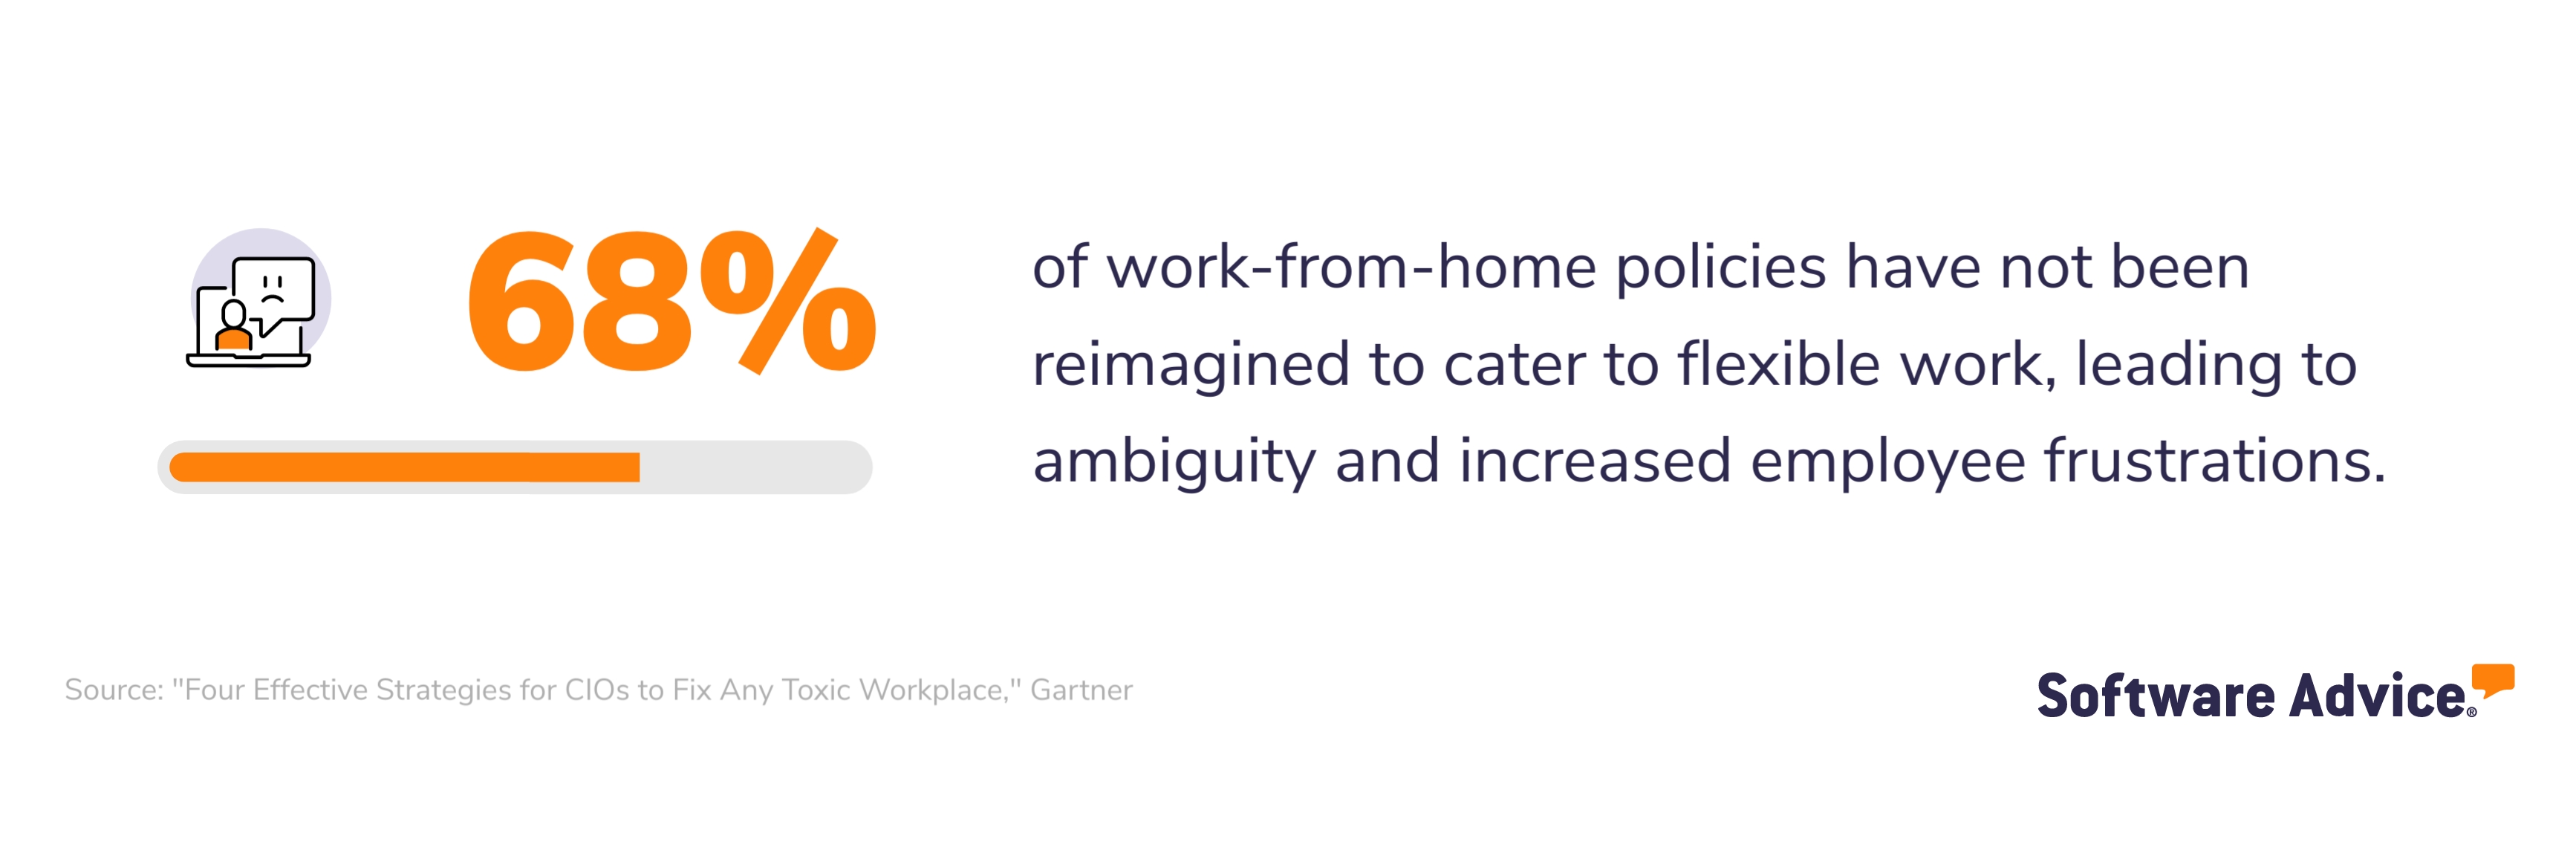 68% of work-from-home policies have not been reimagined to cater to flexible work, leading to ambiguity and increased employee frustrations.